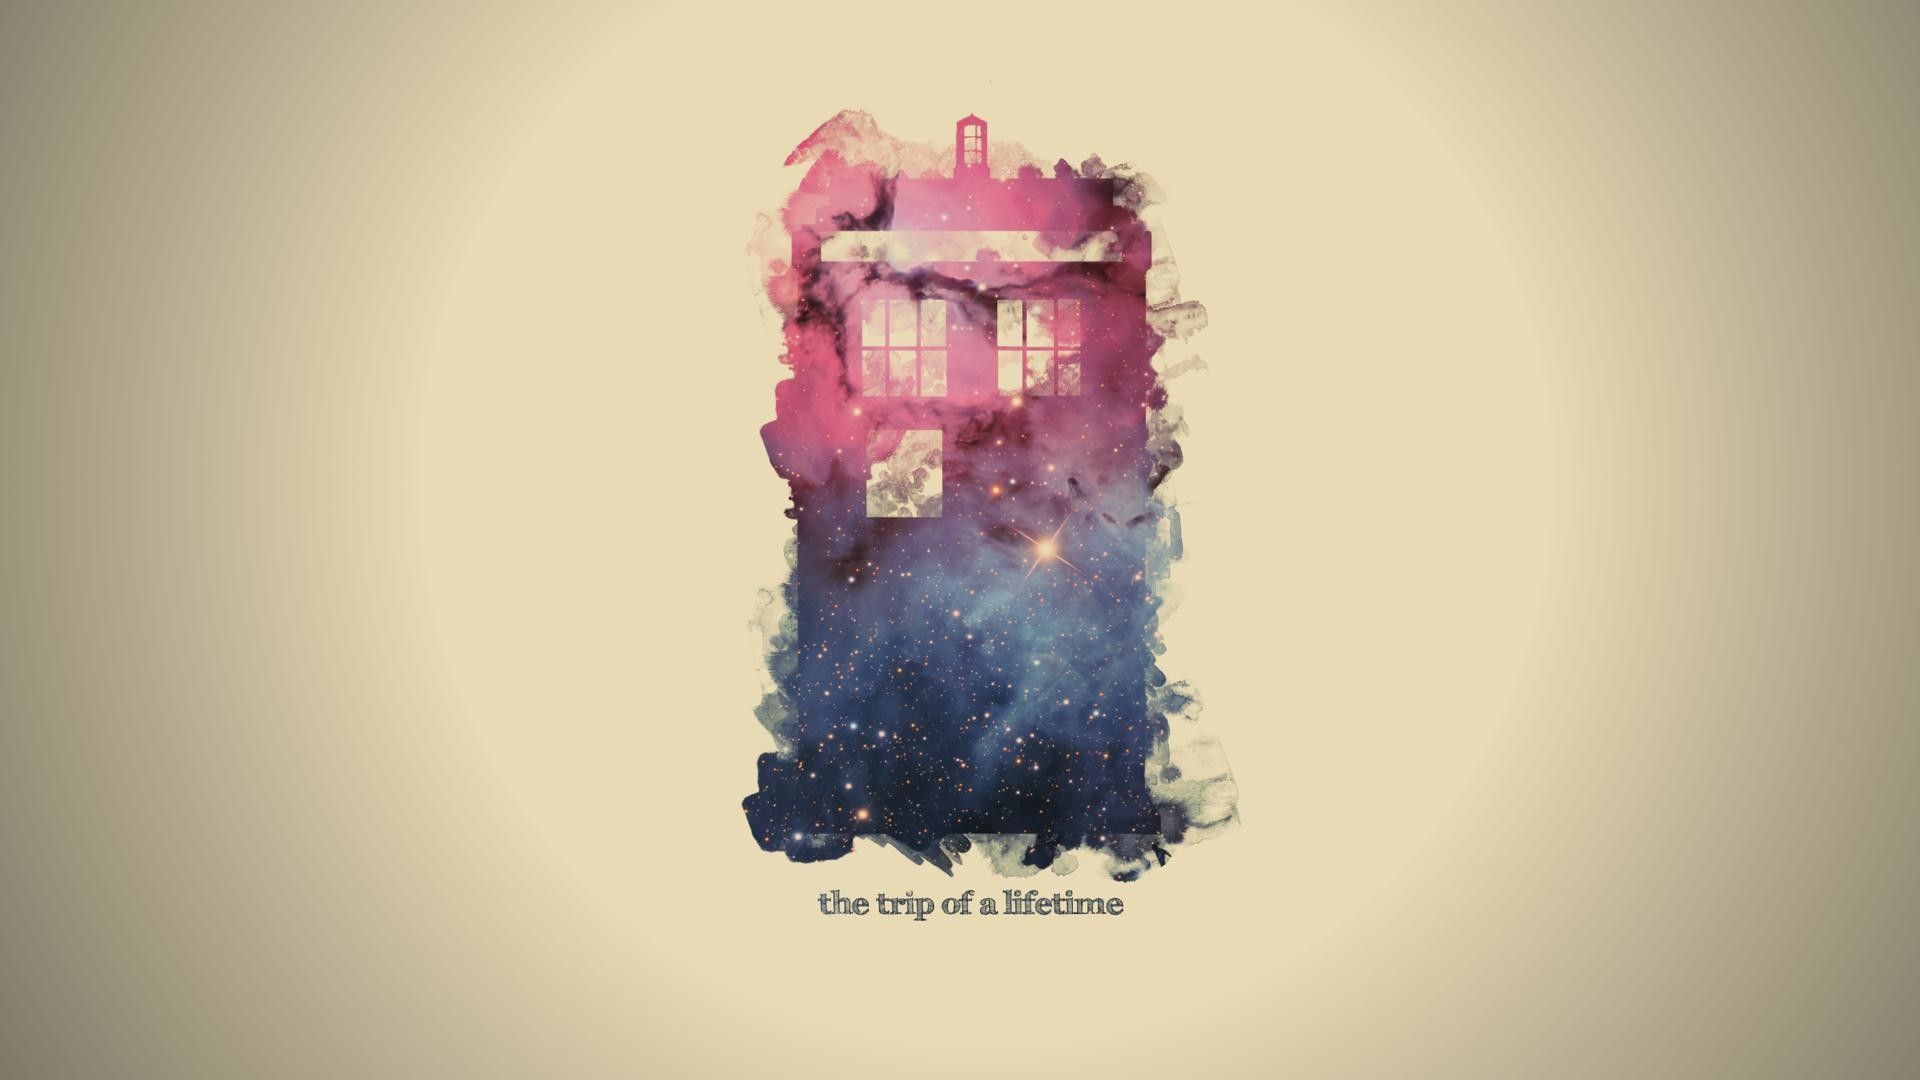 1920x1080 Share Your Doctor Who Wallpapers!